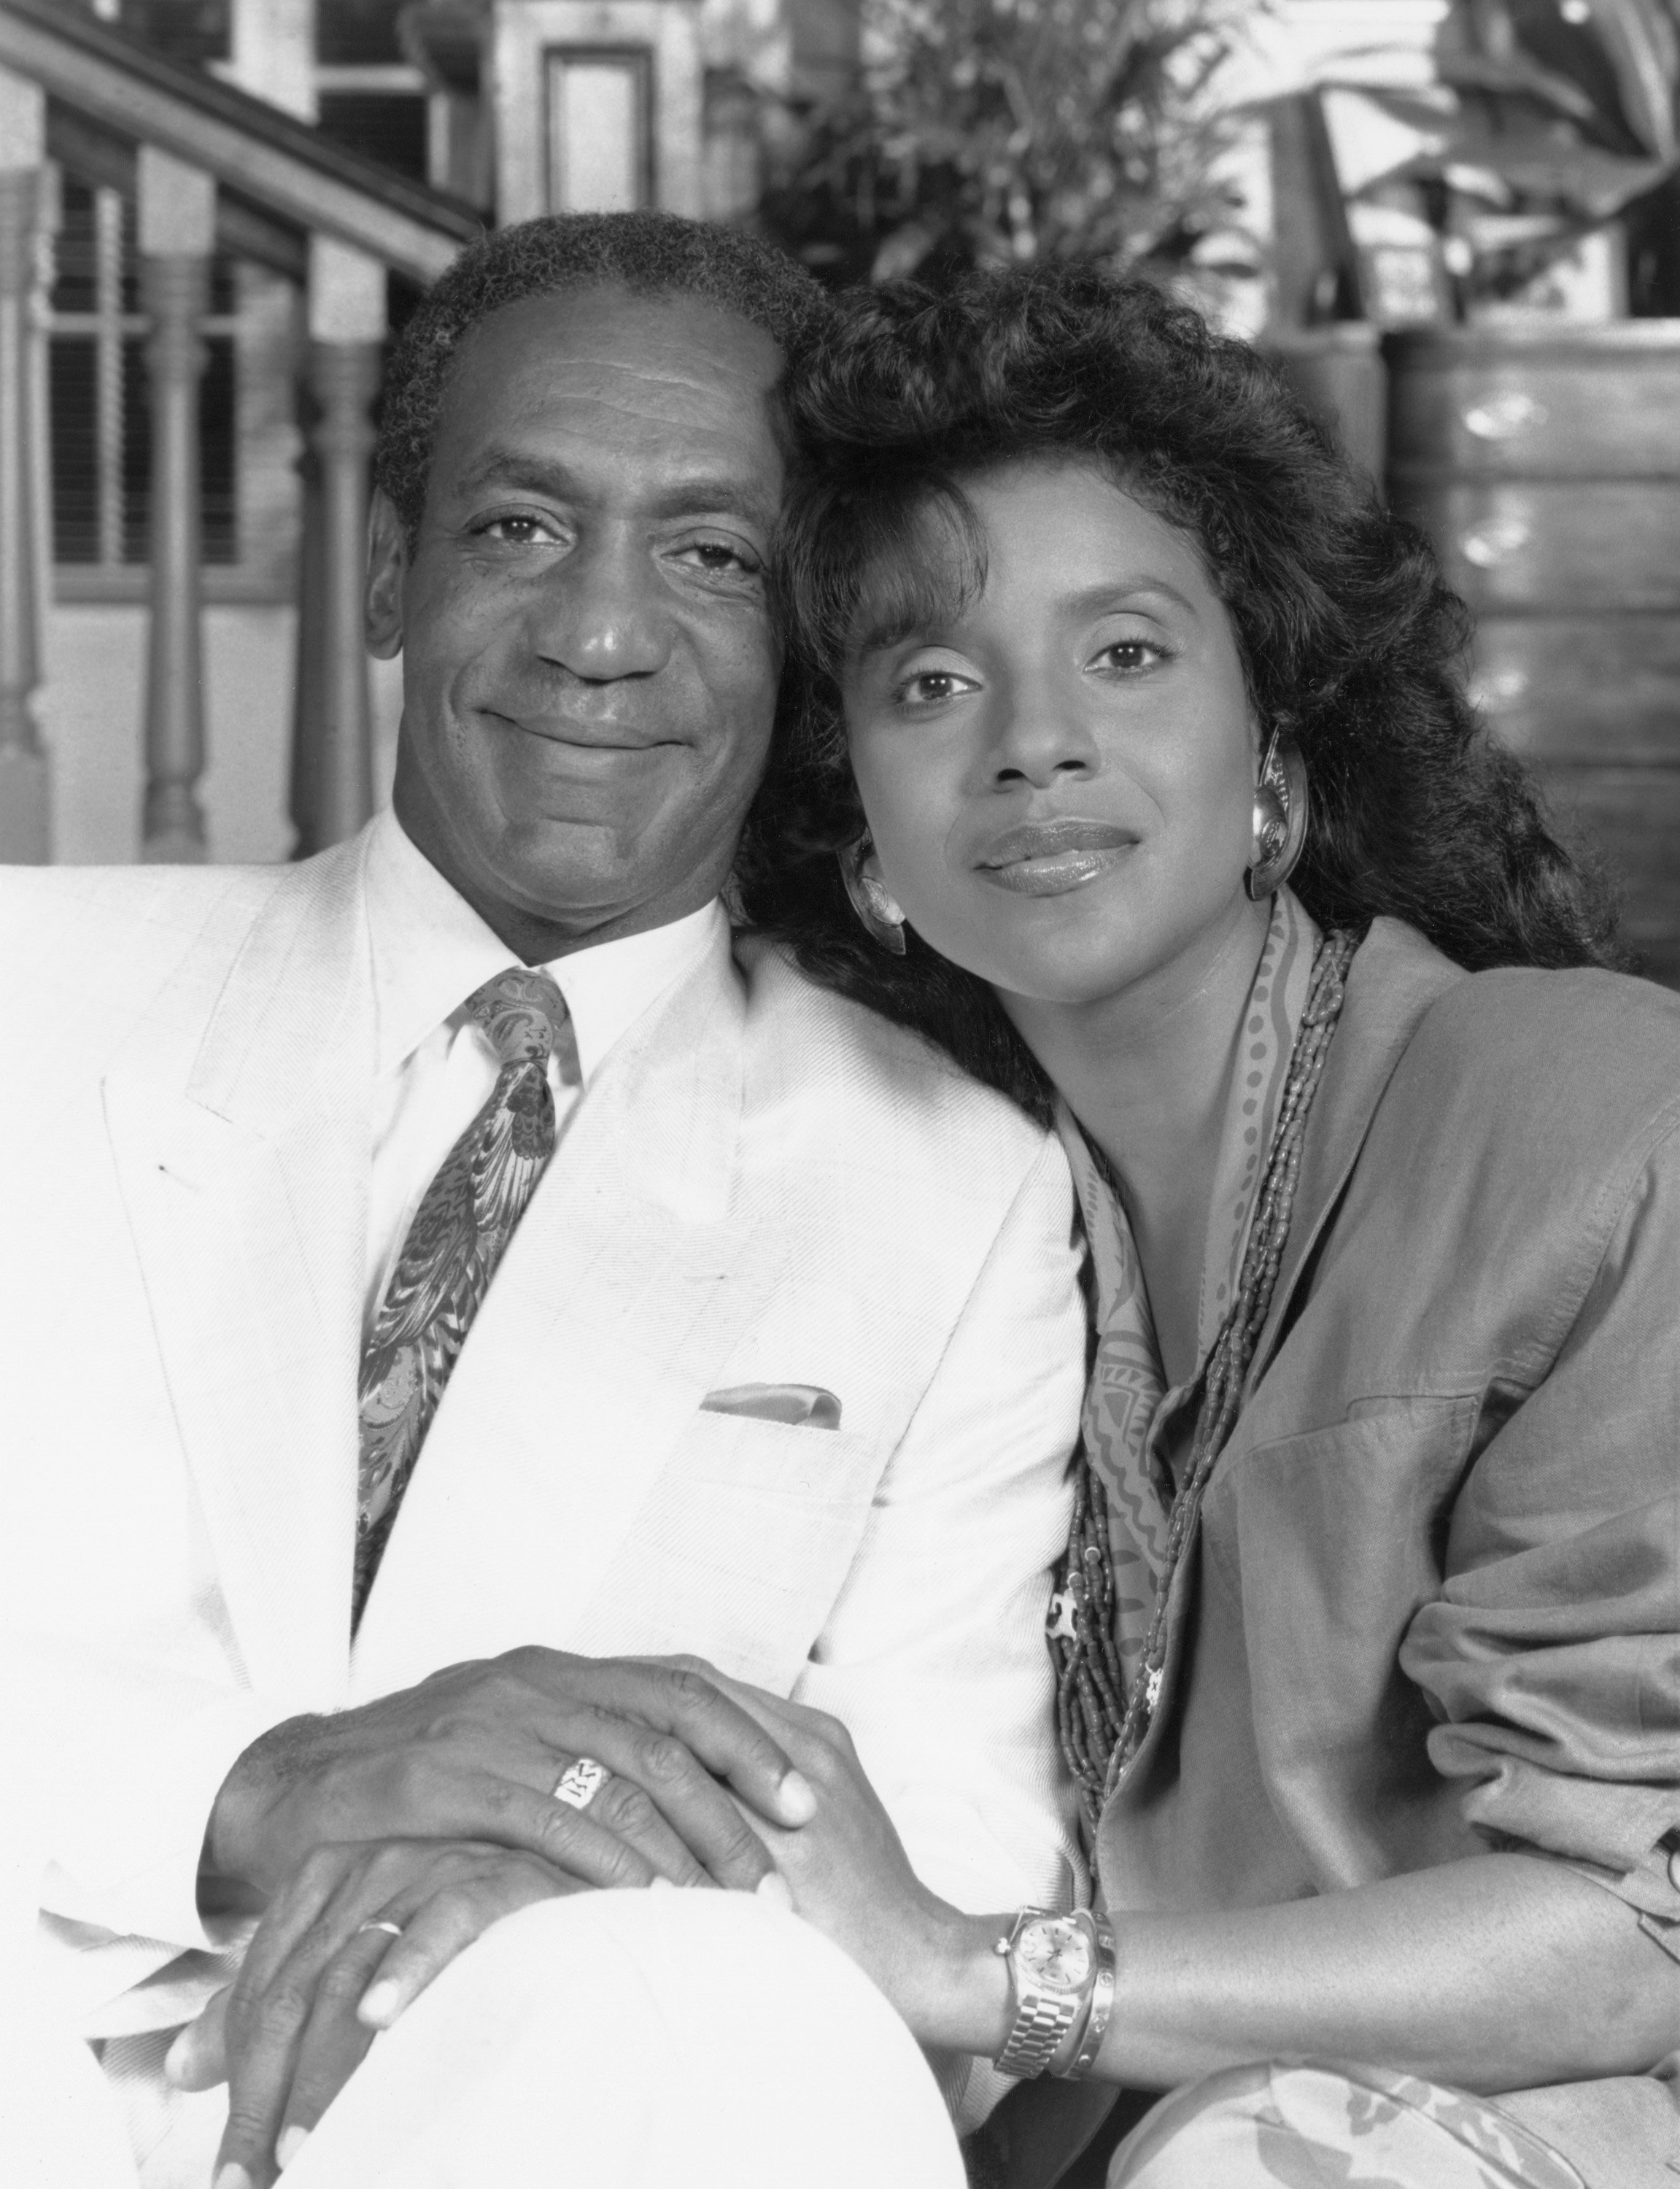 THE COSBY SHOW -- Season 4 -- Pictured: (l-r) Bill Cosby as Dr. Heathcliff 'Cliff' Huxtable, Phylicia Rashad as Clair Hanks Huxtable  | Photo: GettyImages